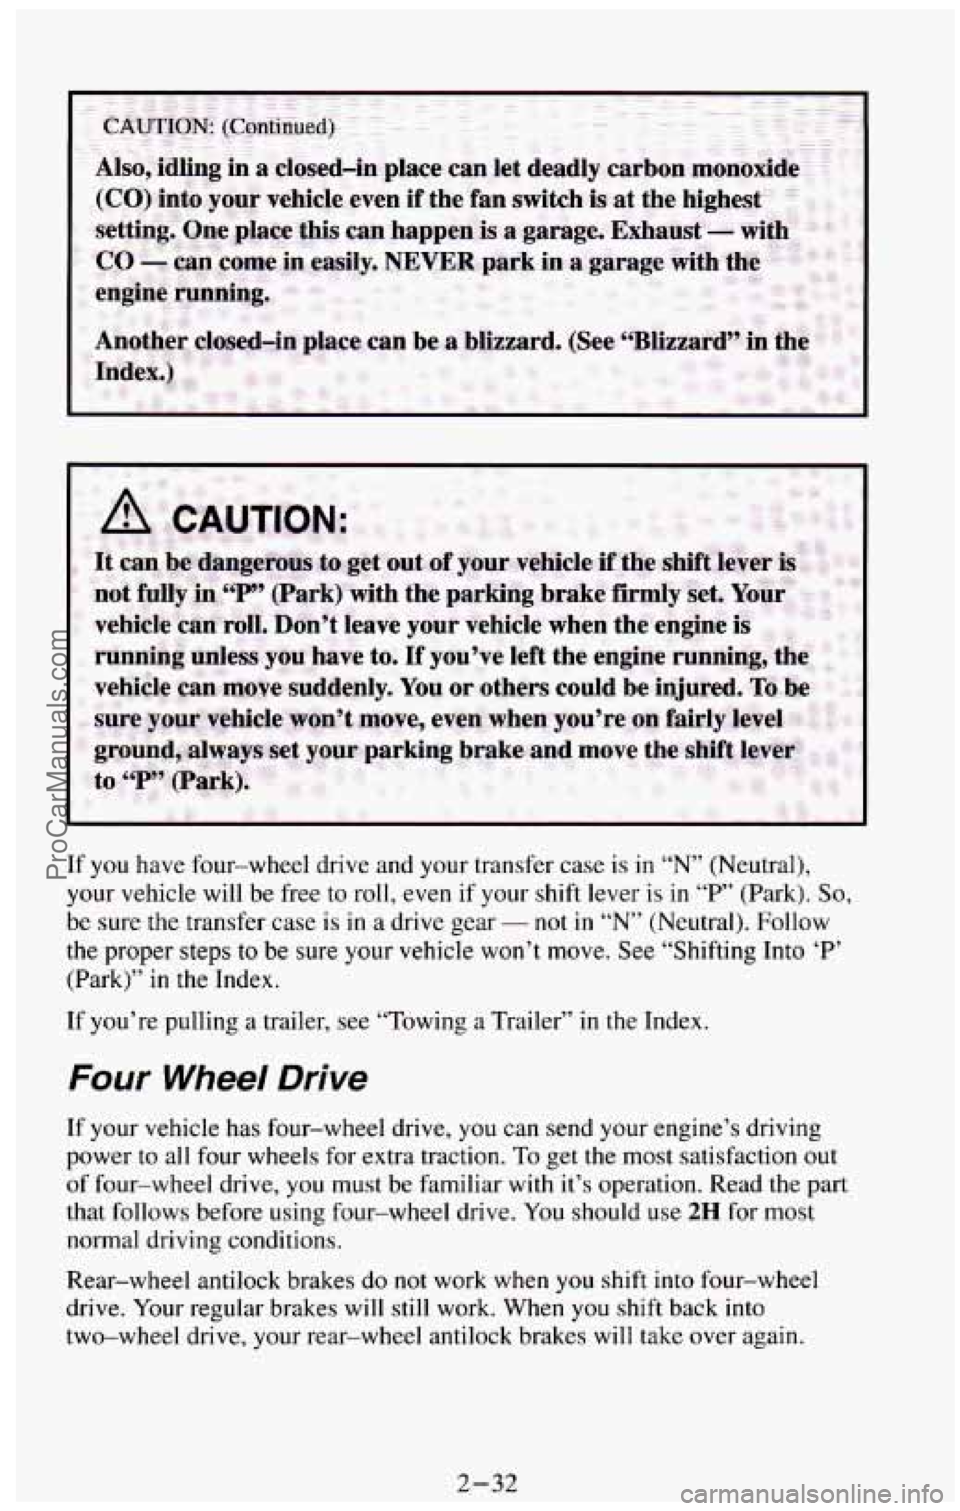 CHEVROLET SUBURBAN 1994  Owners Manual If you have four-wheel  drive  and  your transfer case is  in “N” (Neutral), 
your vehicle  will be free to  roll, even  if your  shift  lever  is  in 
“P” (Park). So, 
be  sure  the  transfer